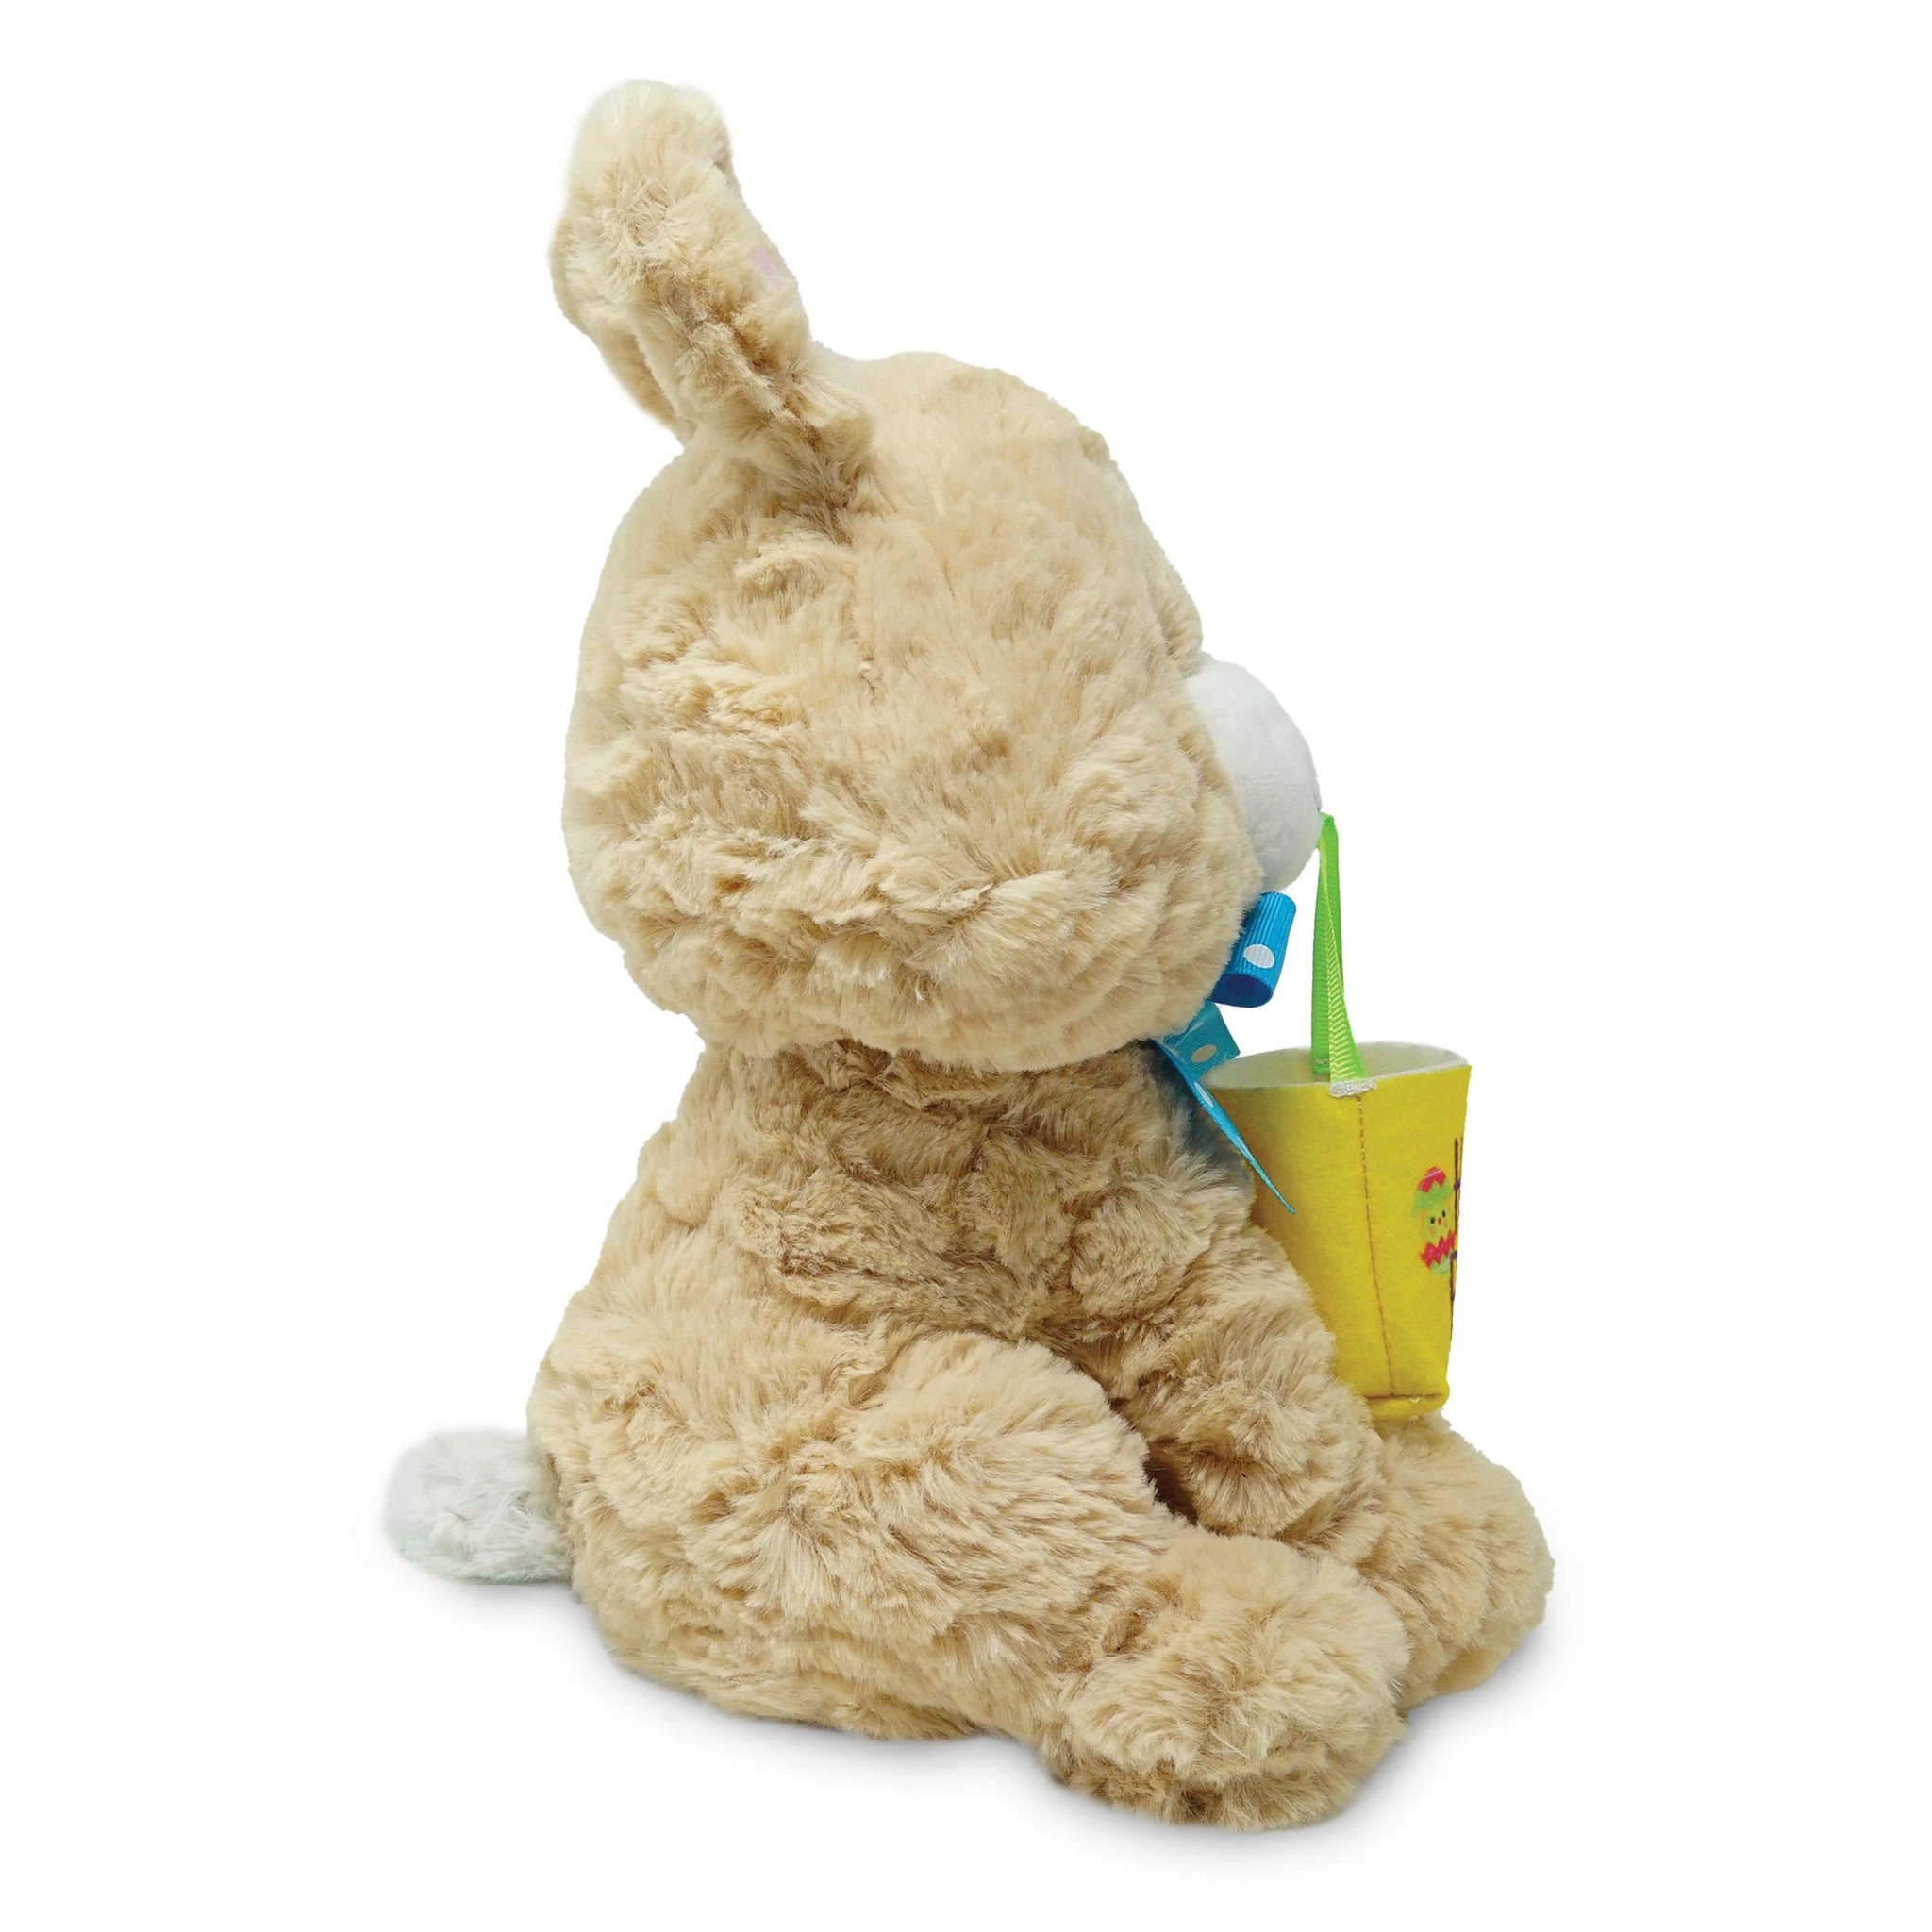 Bunny toy for girl and boy